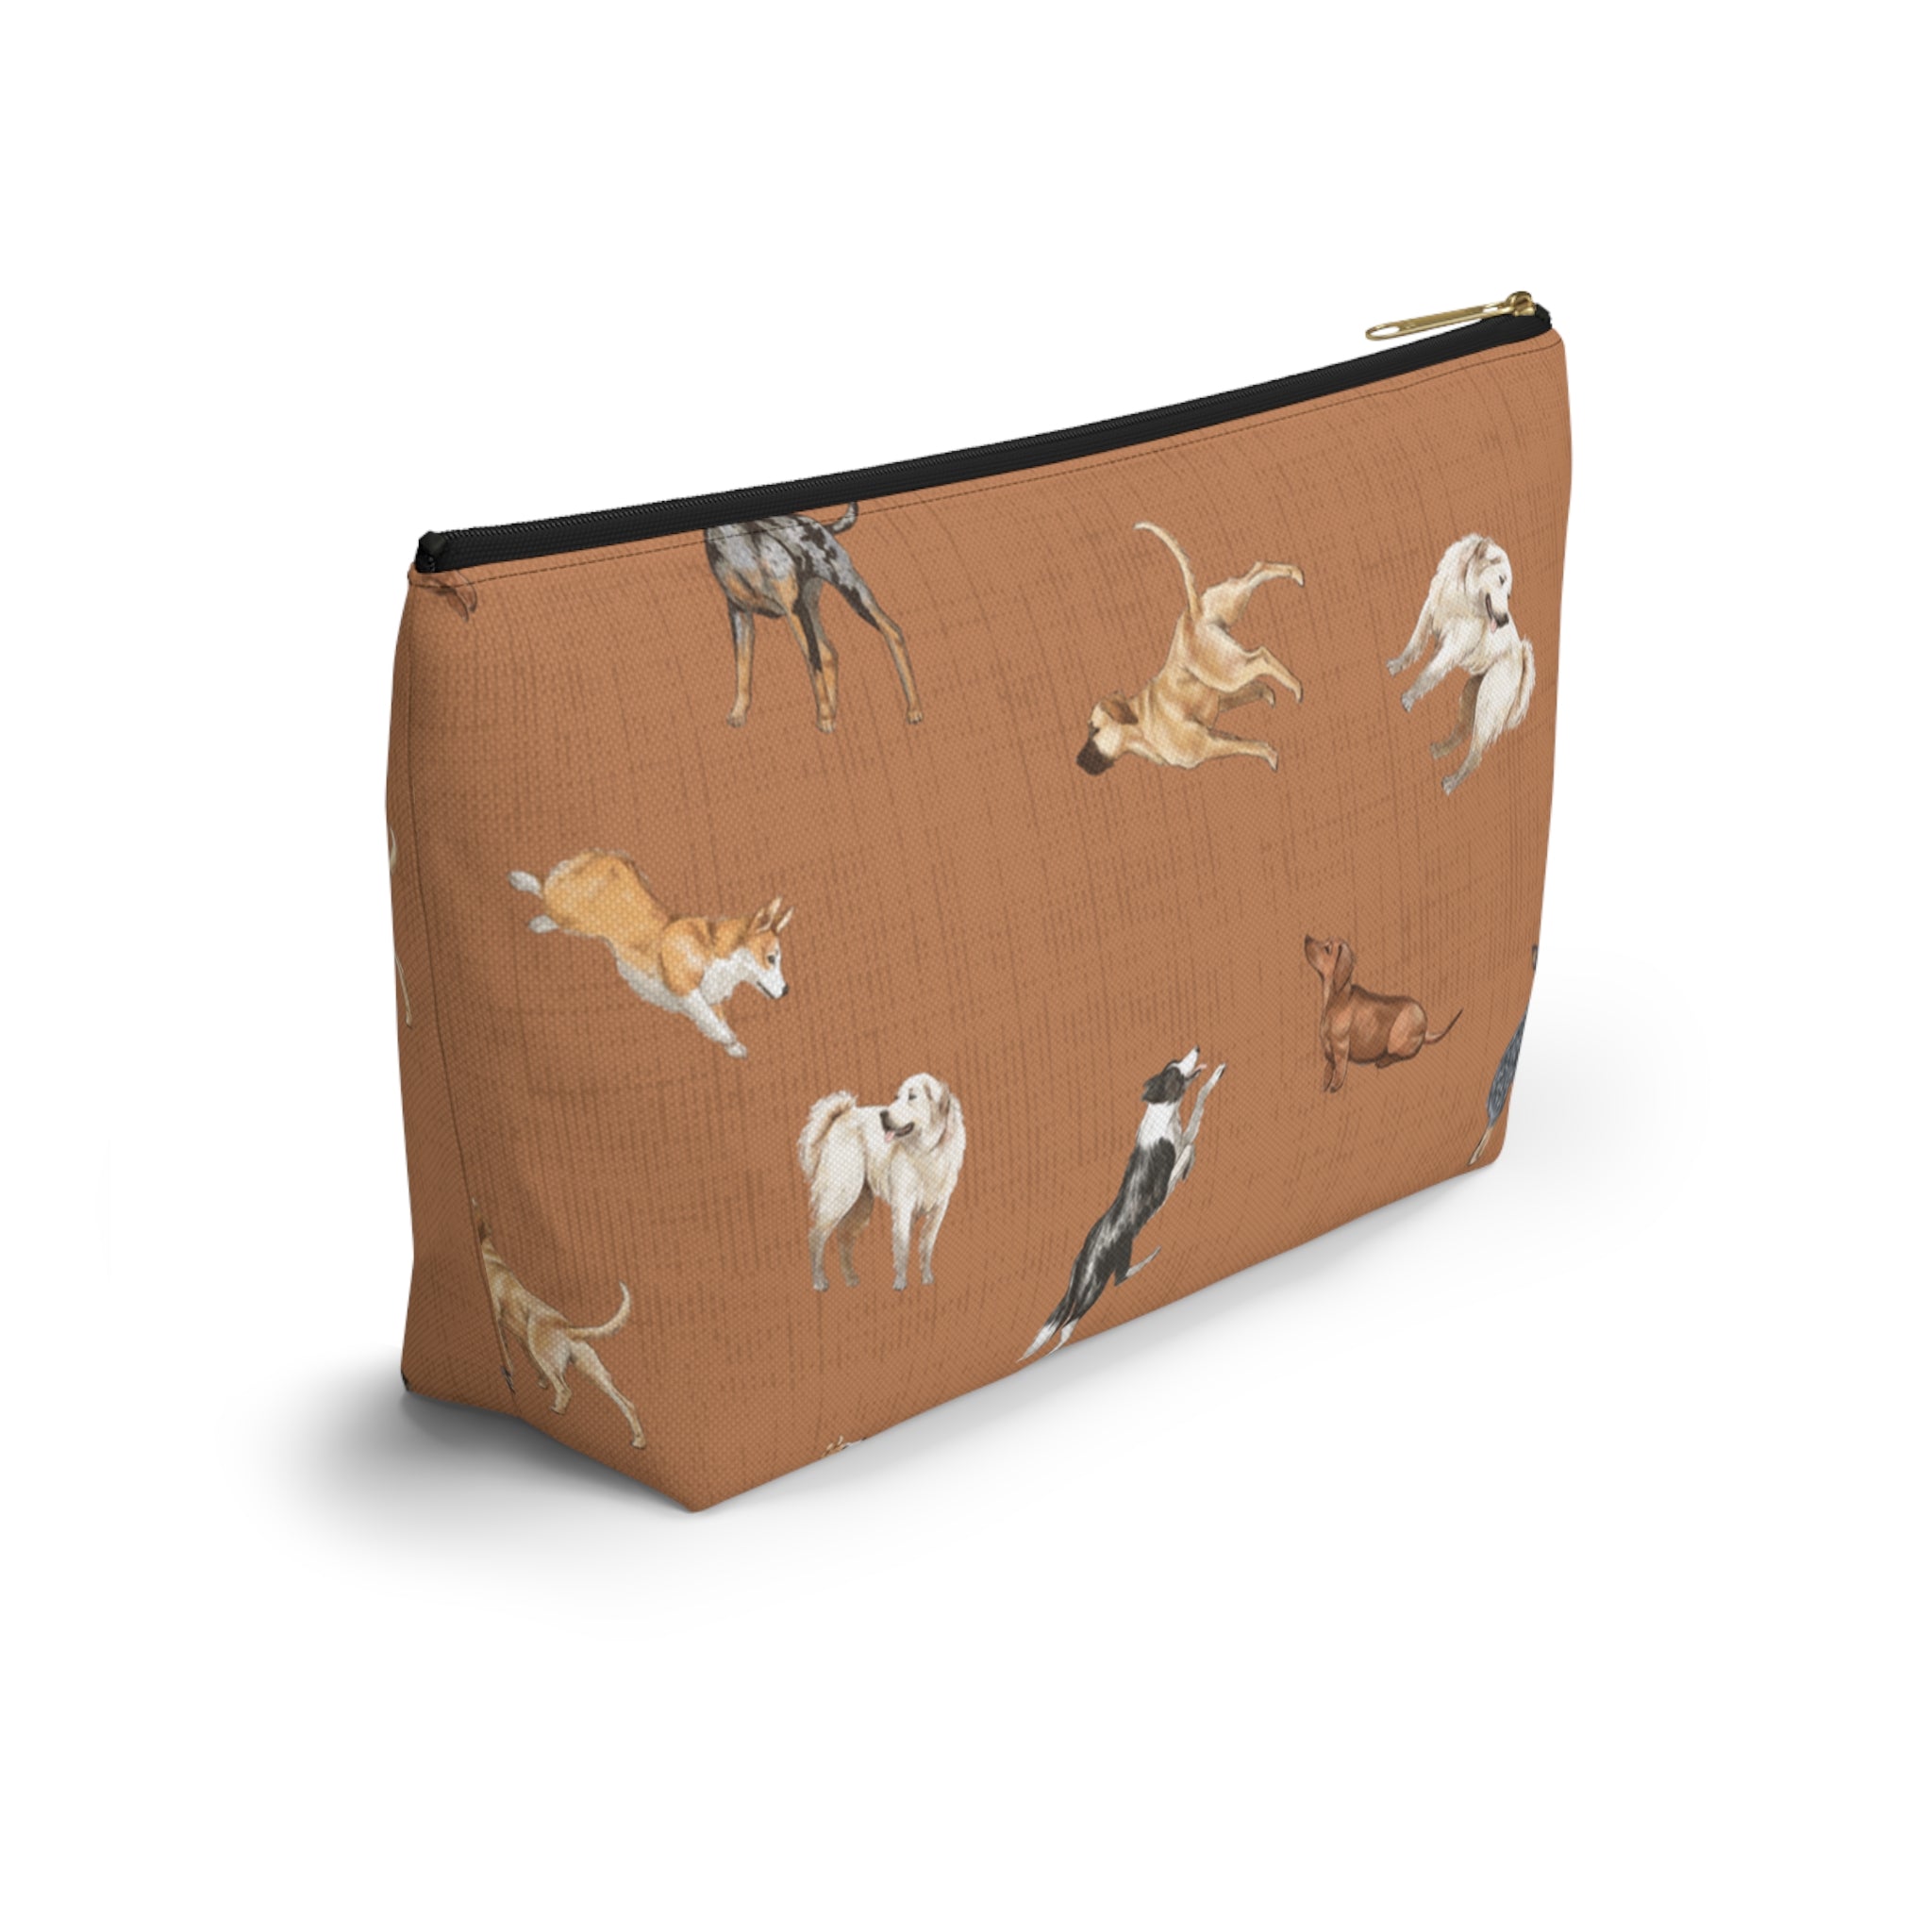 Cow Dogs Pencil Pouch in Saddle